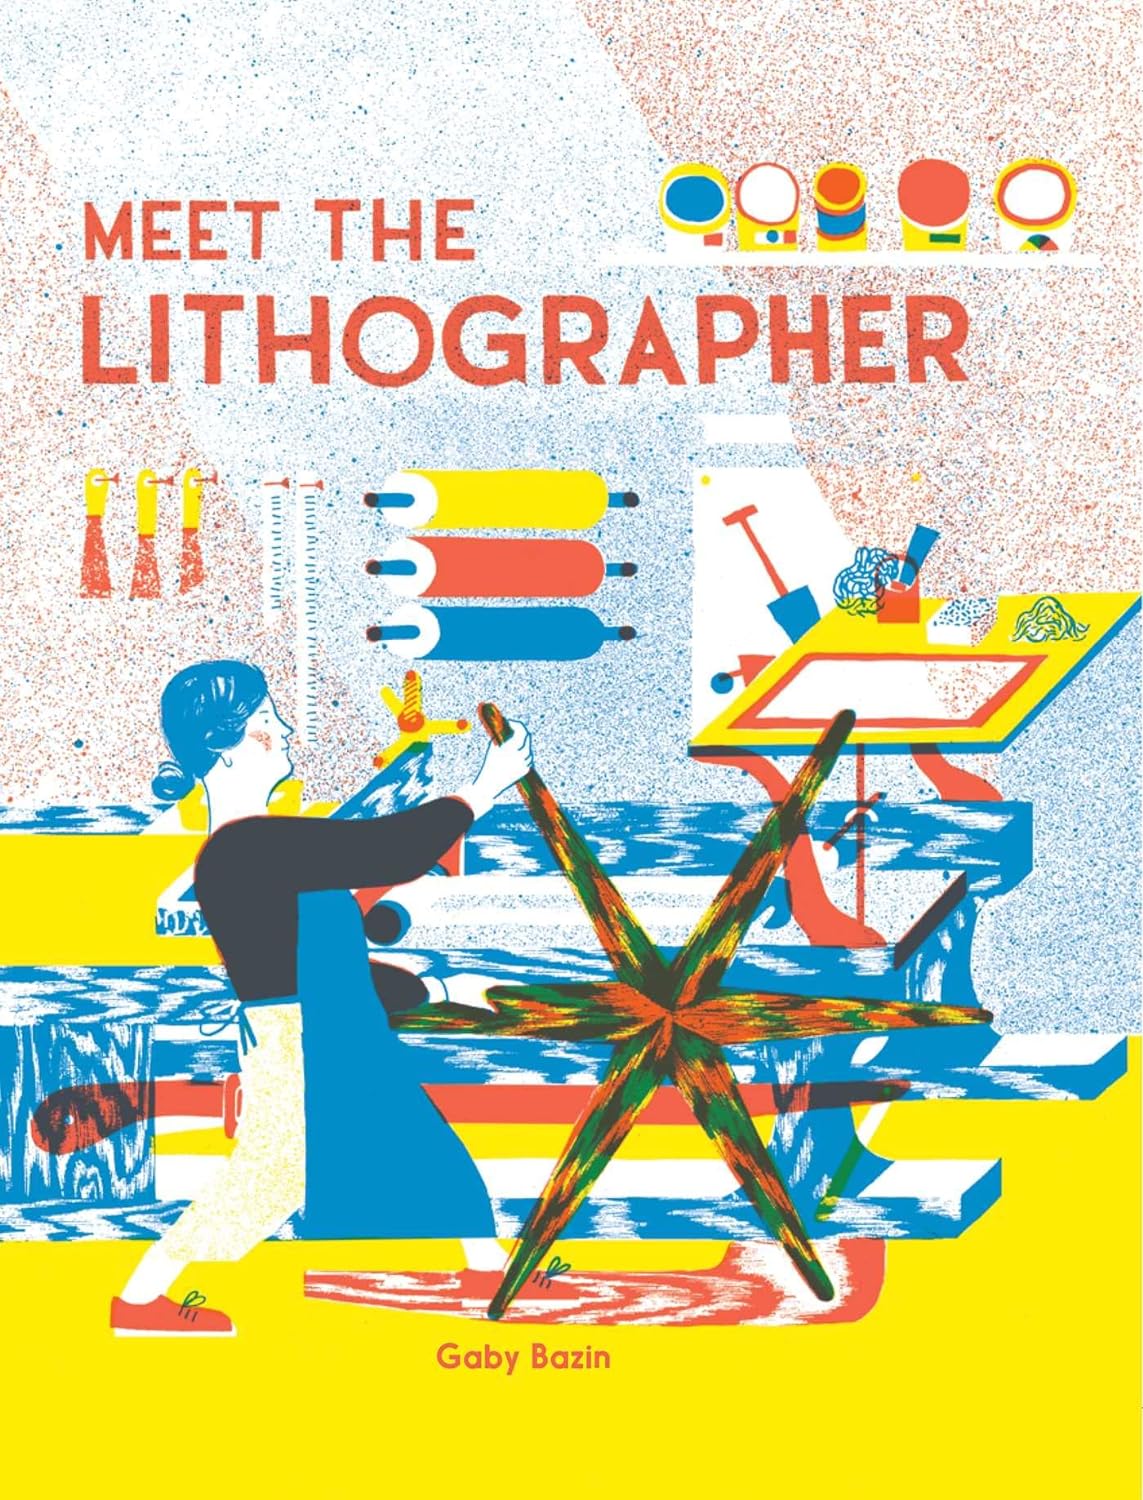 Book Review: Meet the Lithographer by Gabby Bazin